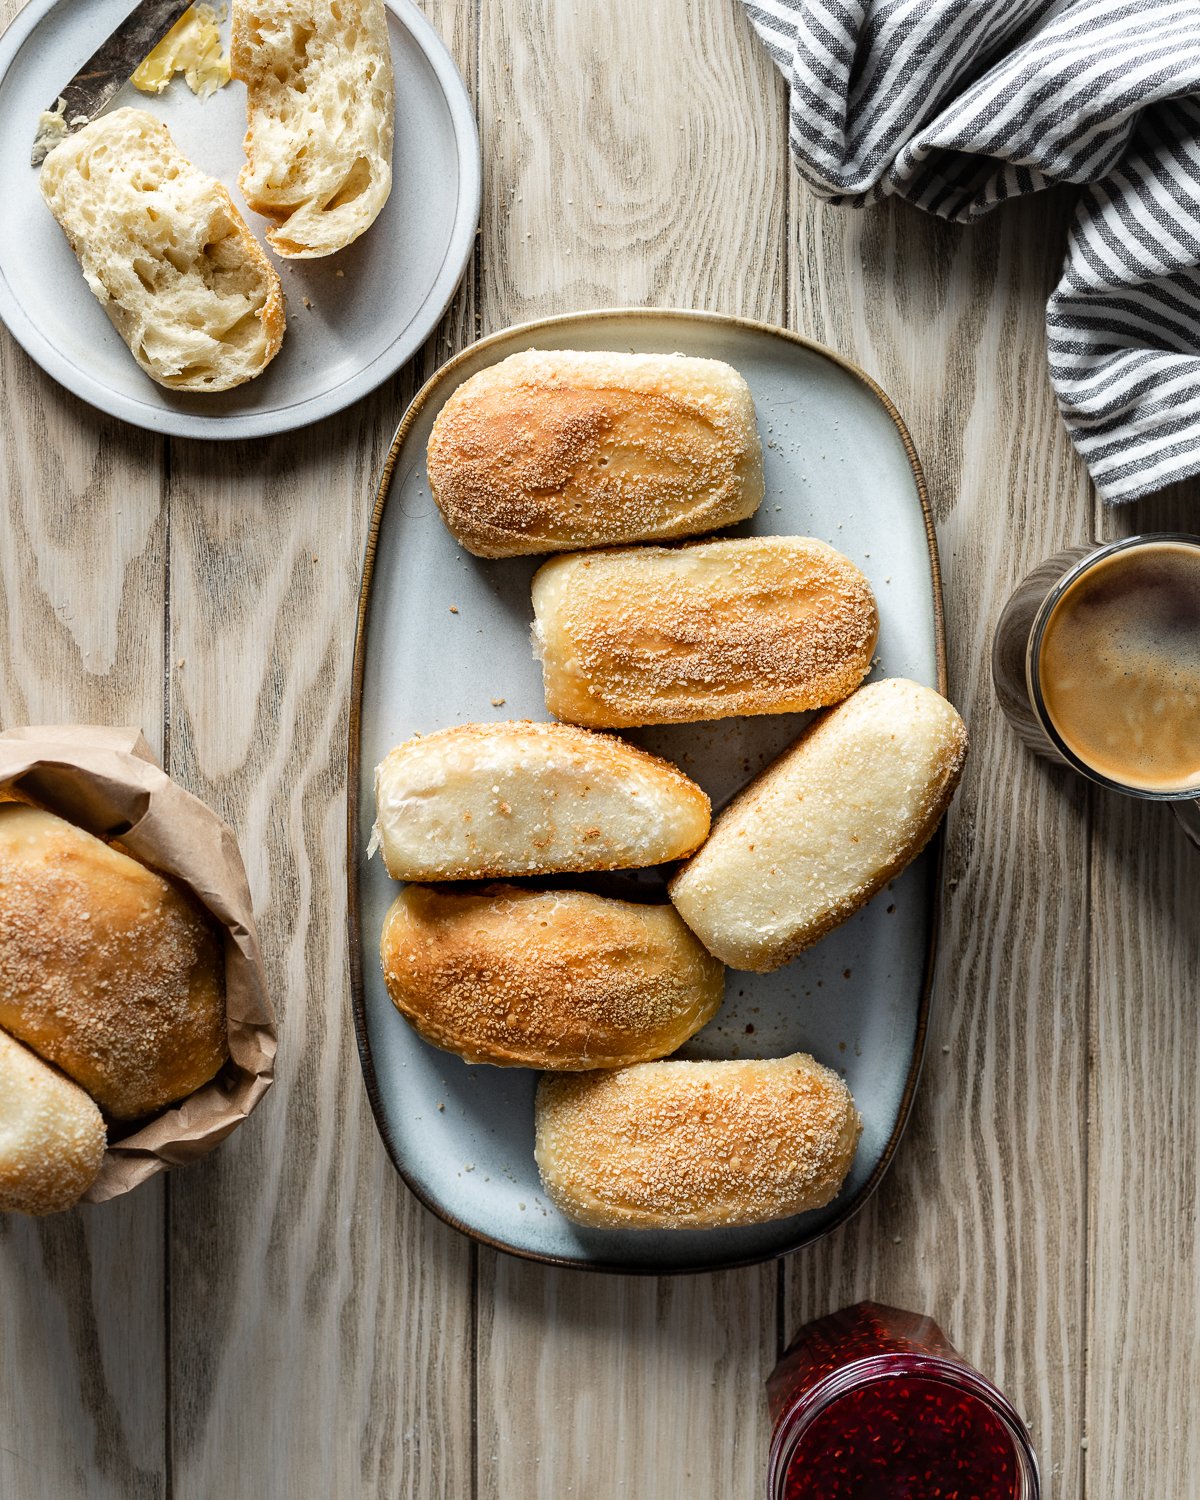 baked pandesal on a platter with jam, coffee and butter